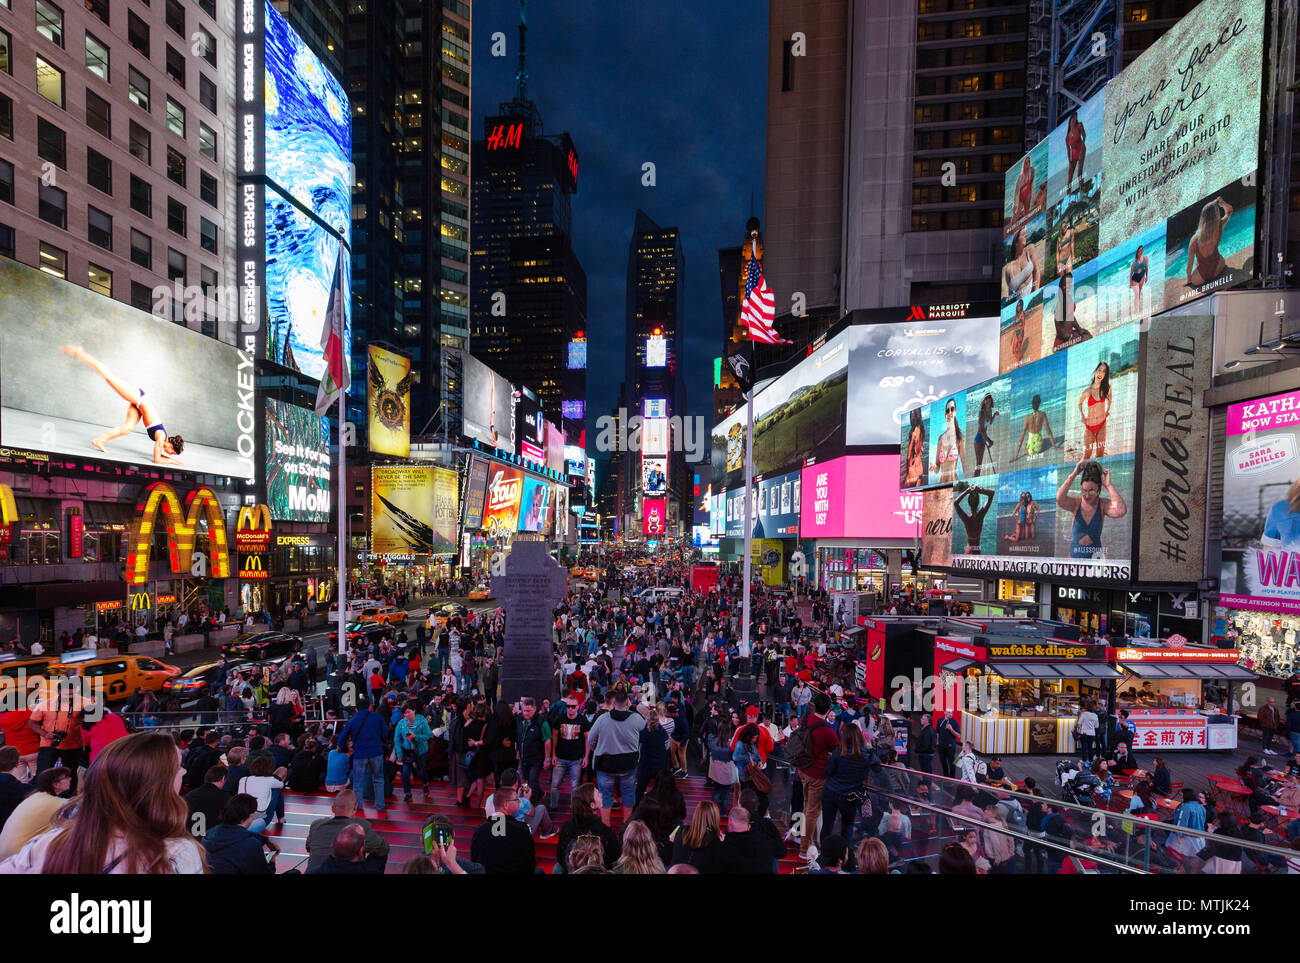 Times Square New York at night, with crowds of people and colorful neon signs; Times Square, Midtown, New York city, USA Stock Photo